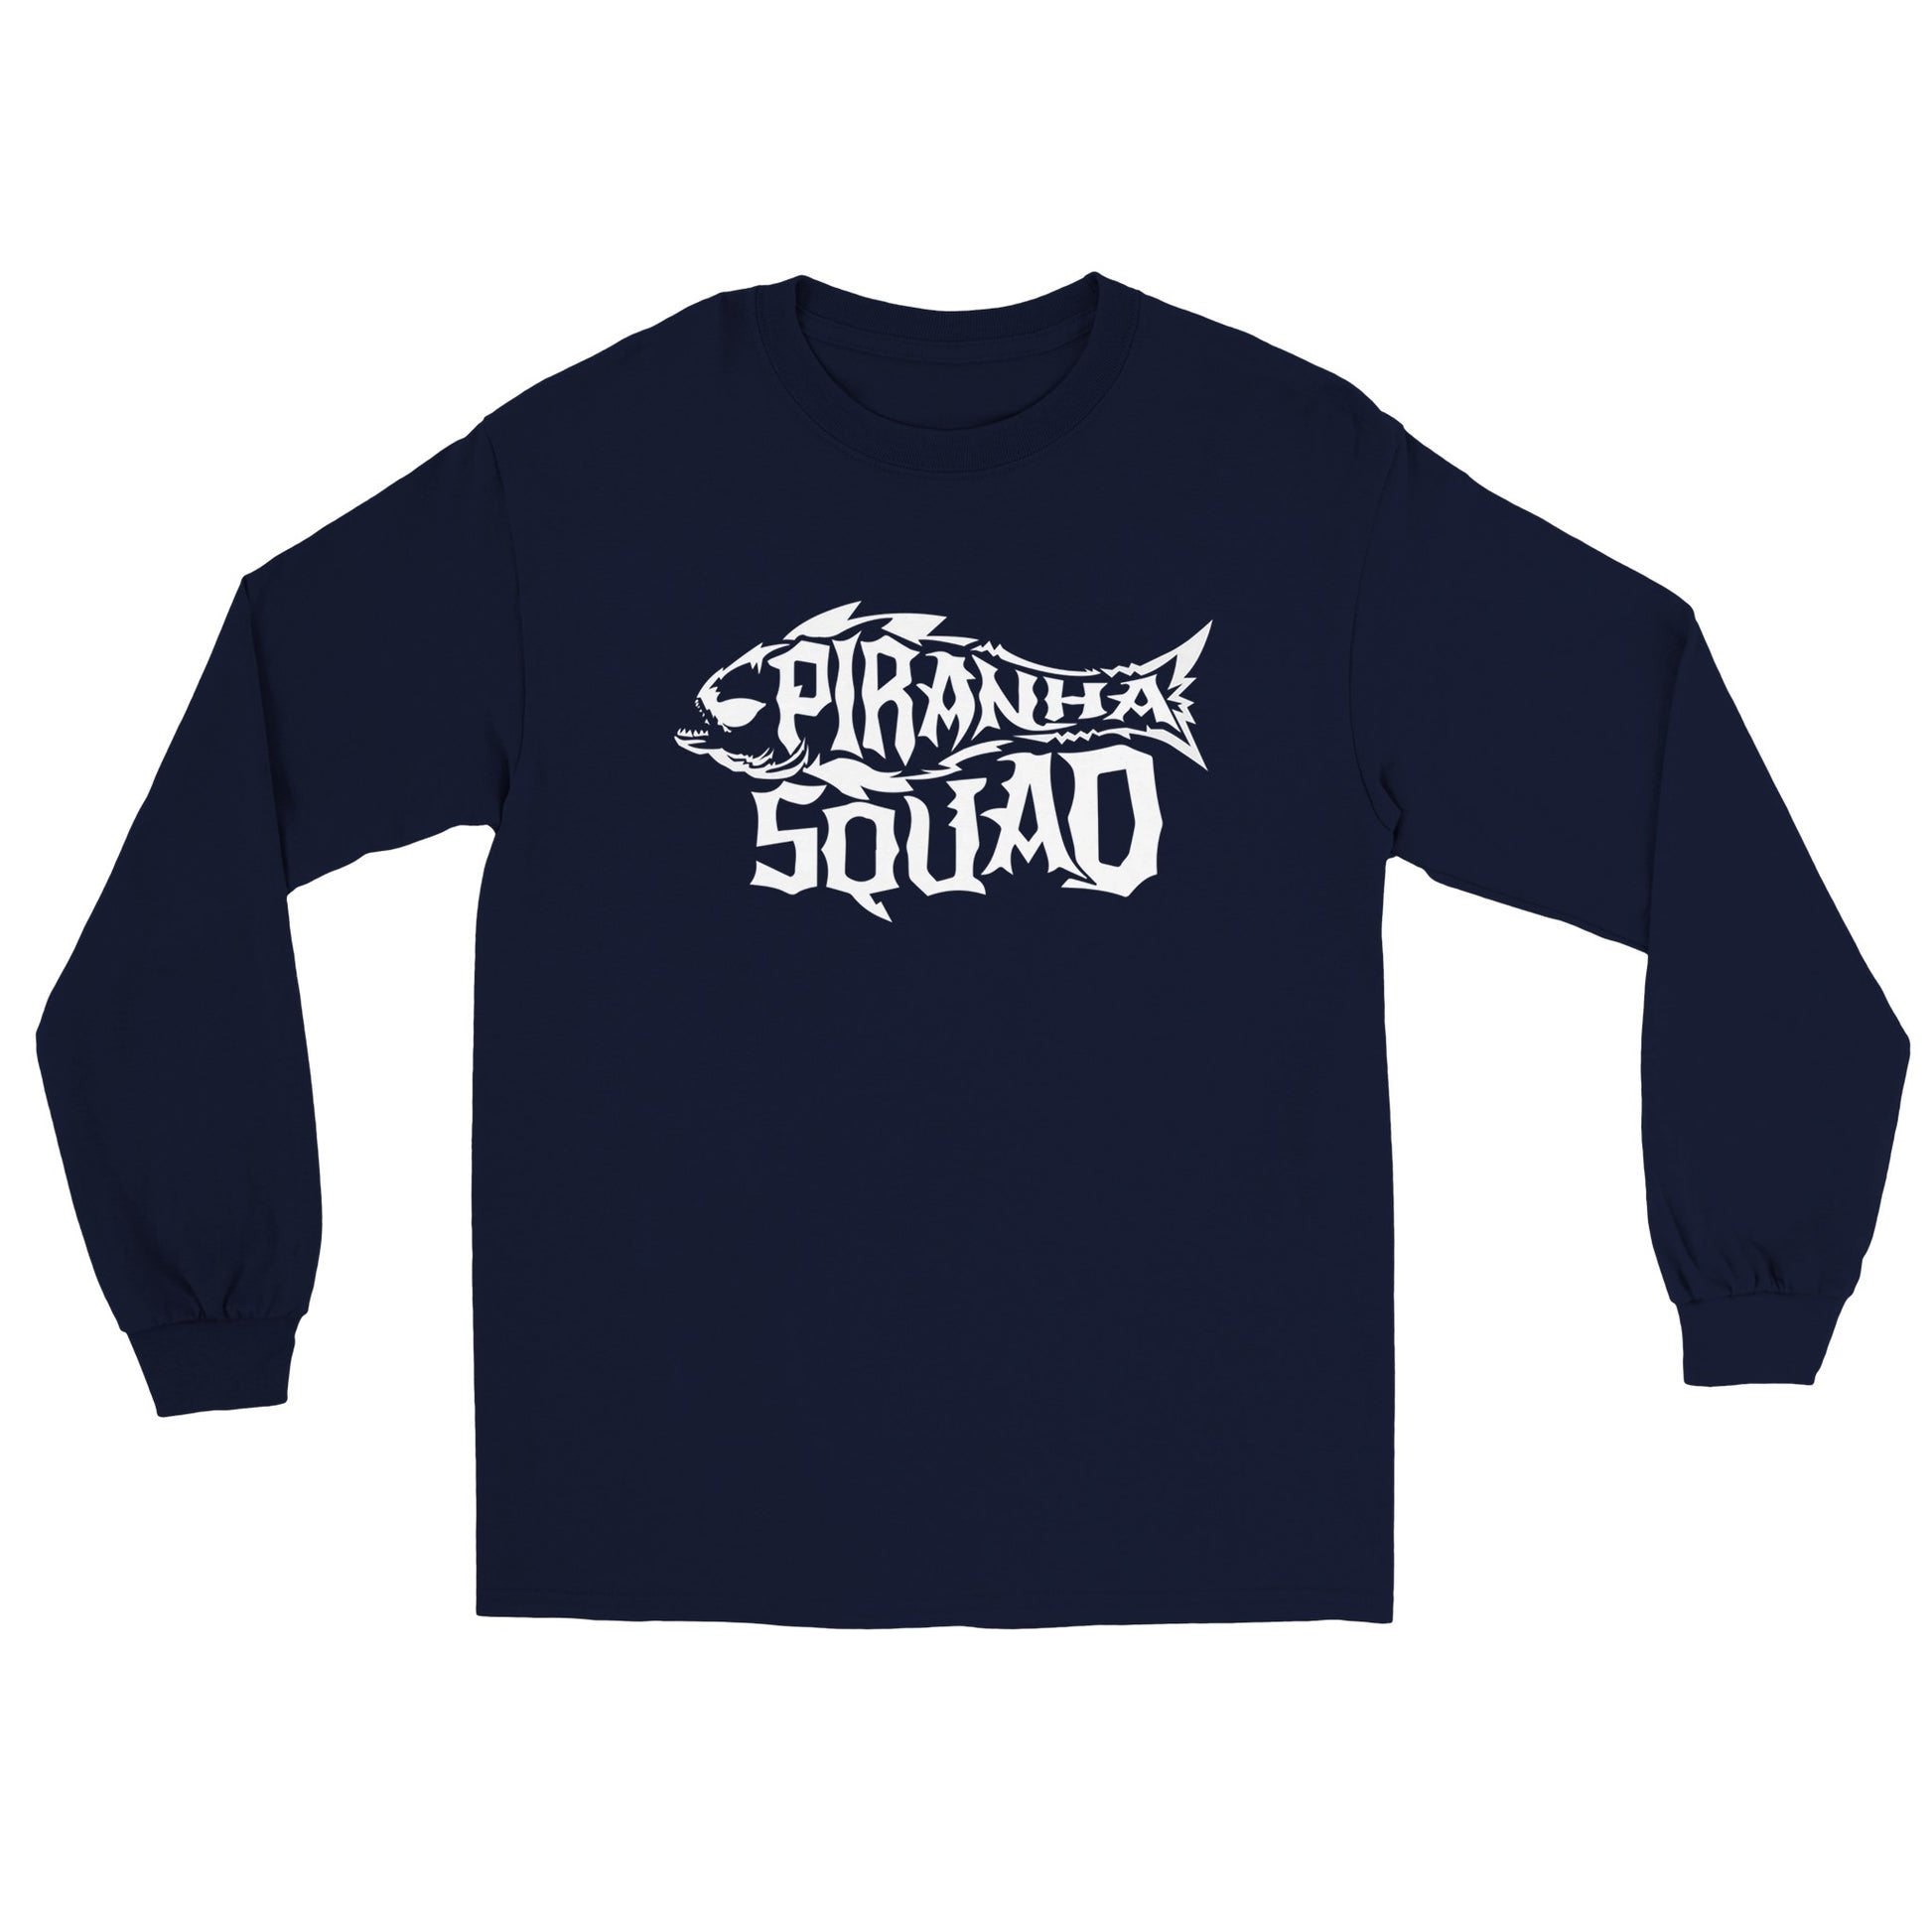 a navy long sleeve shirt with a white logo